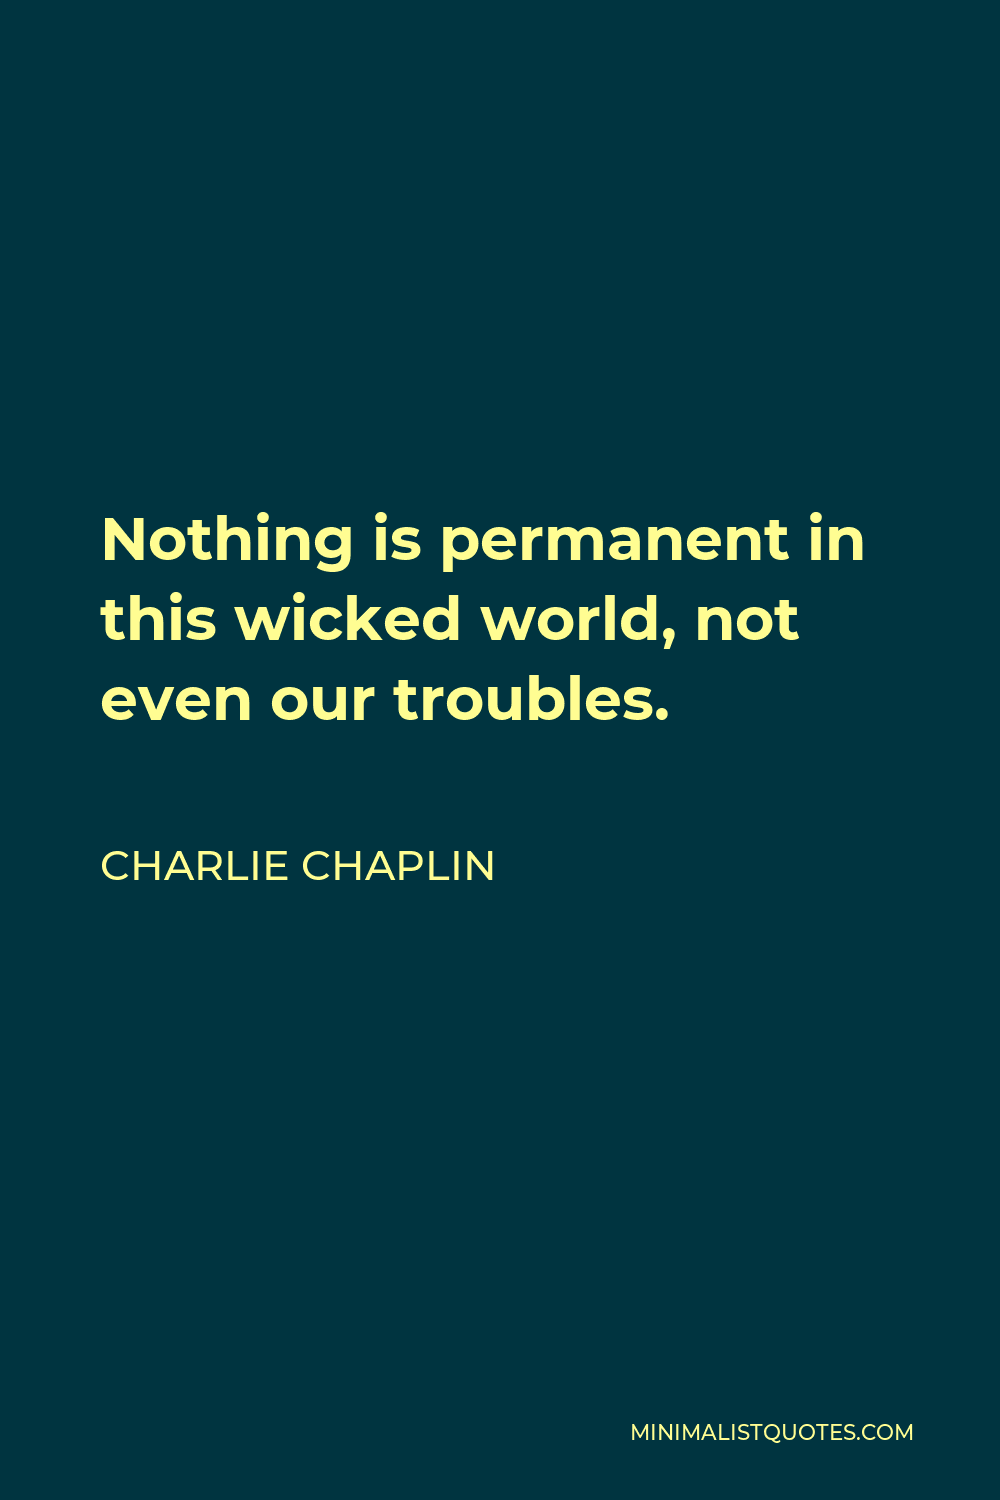 Charlie Chaplin Quote Nothing Is Permanent In This Wicked World Not Even Our Troubles